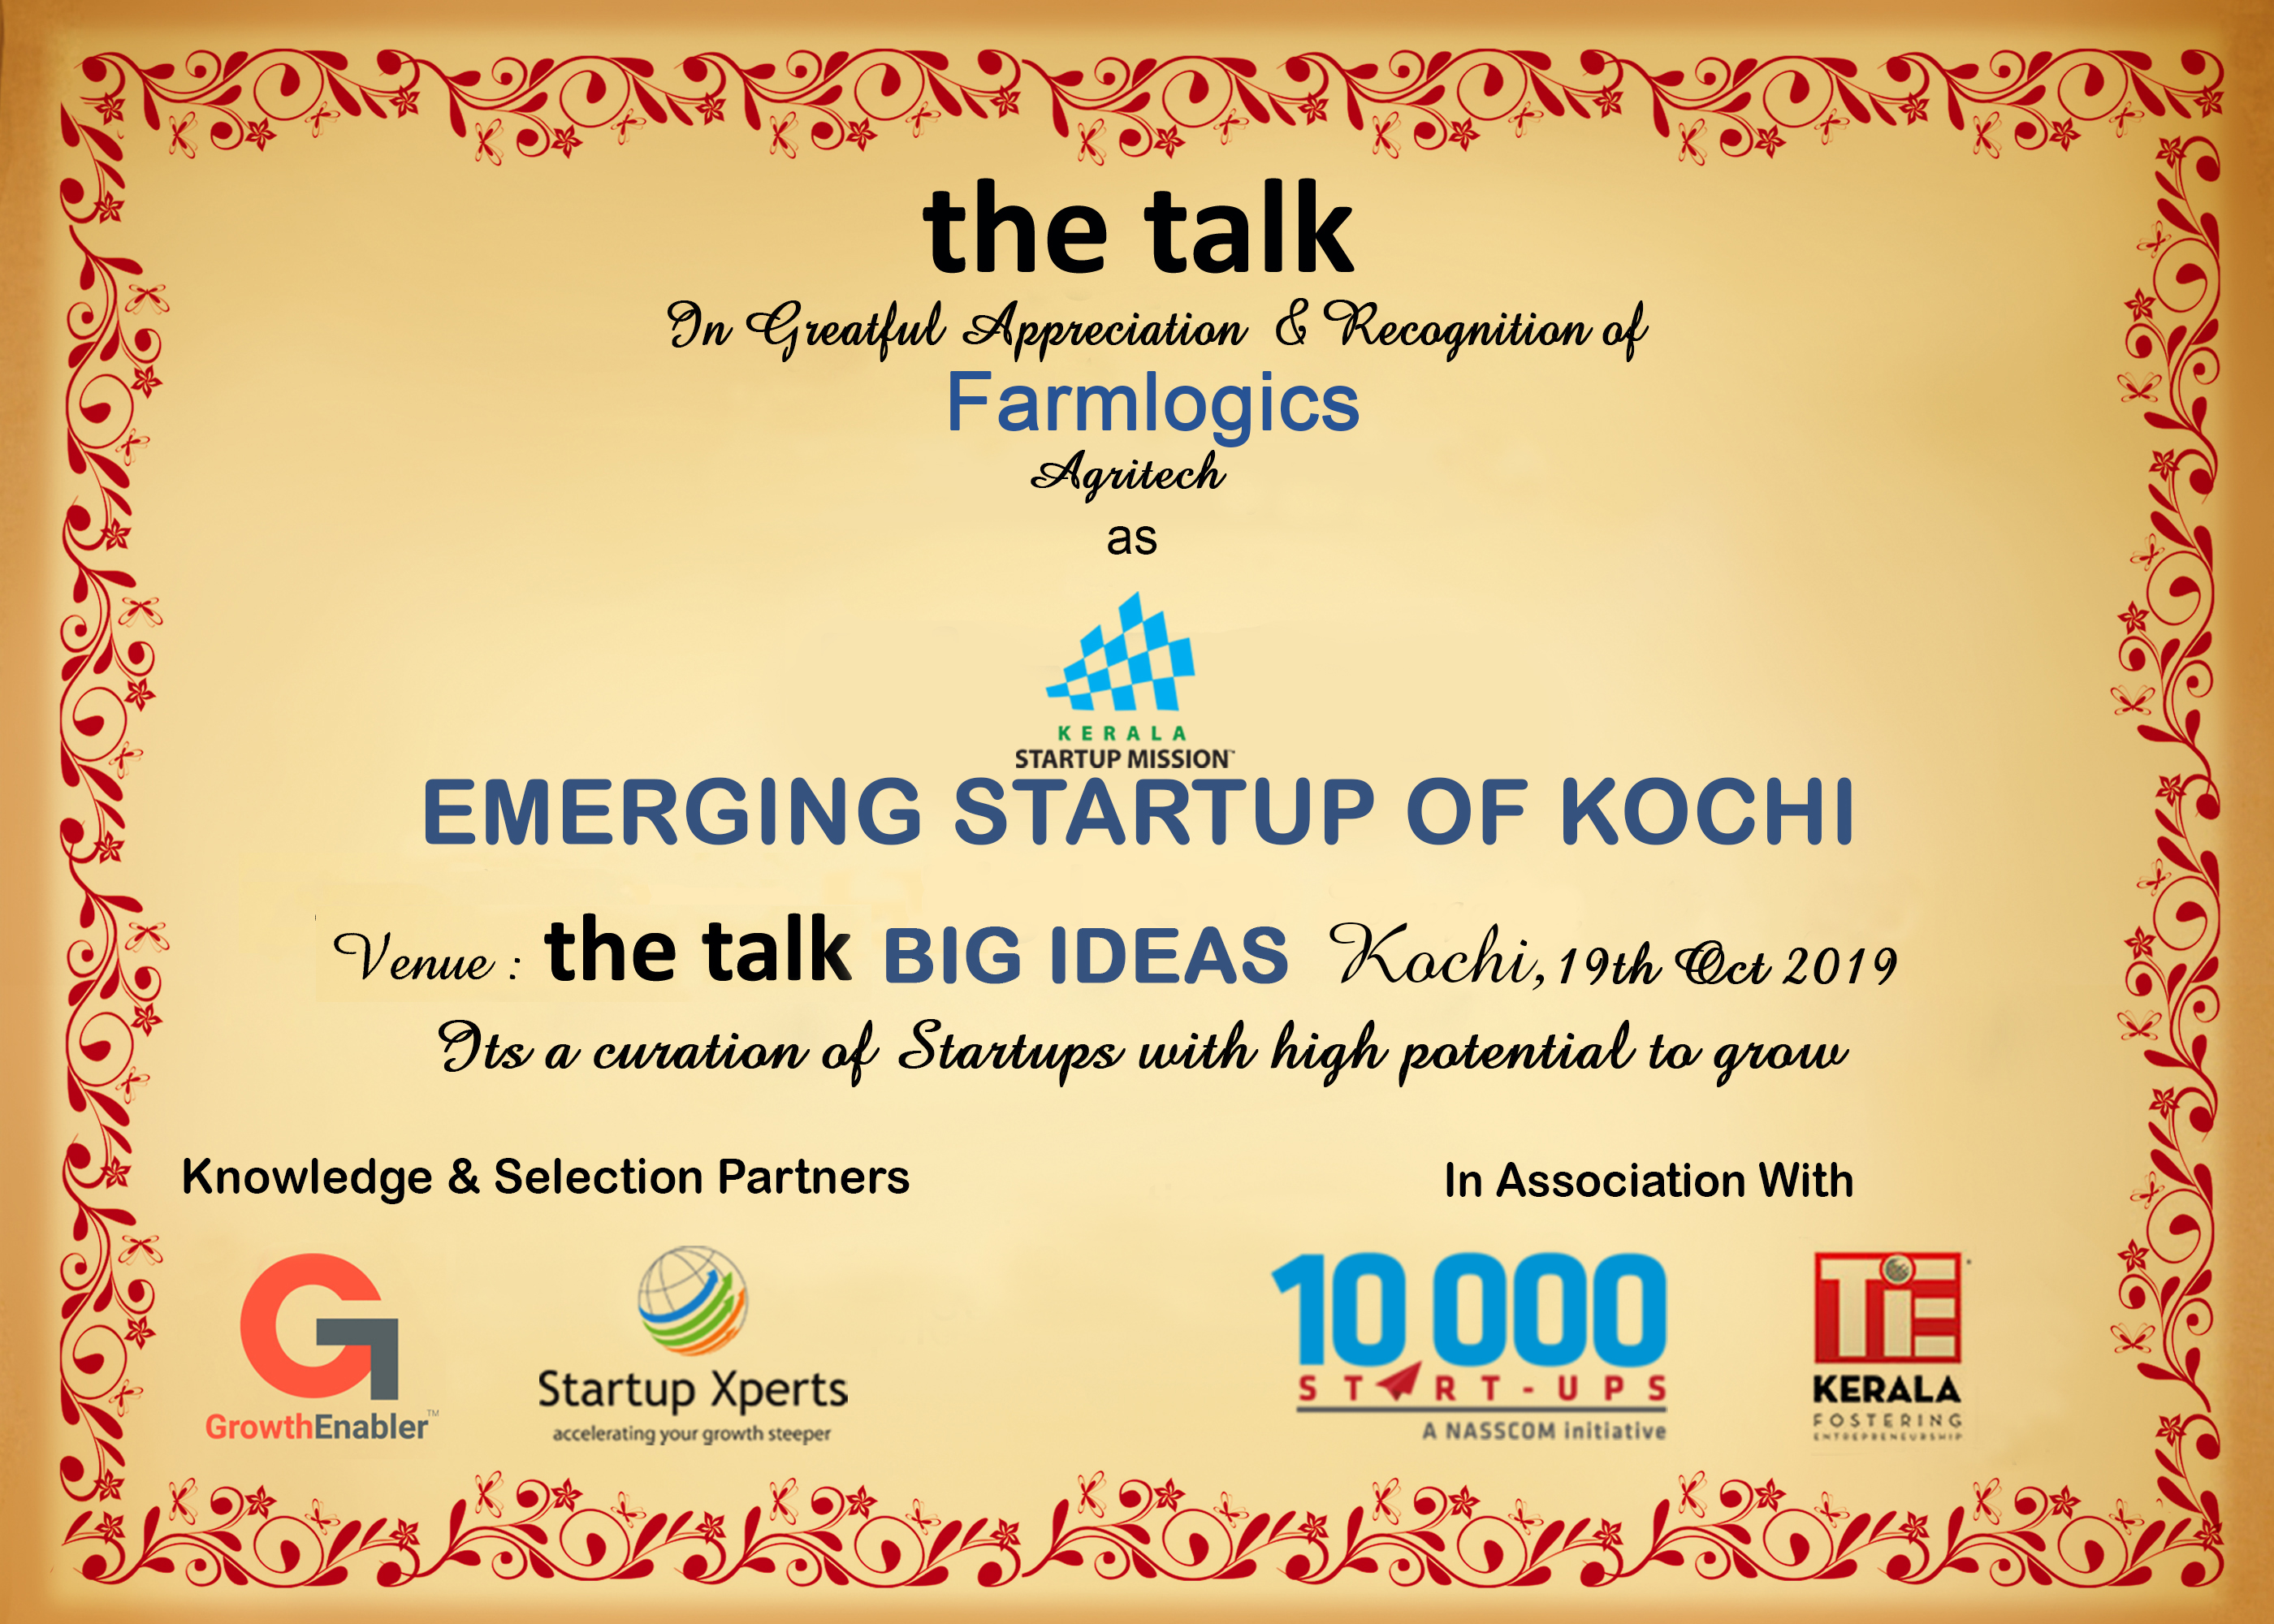 the talk - Big Ideas To Scale SME's And Startups The Westin, Hyderabad - 27th May 2017